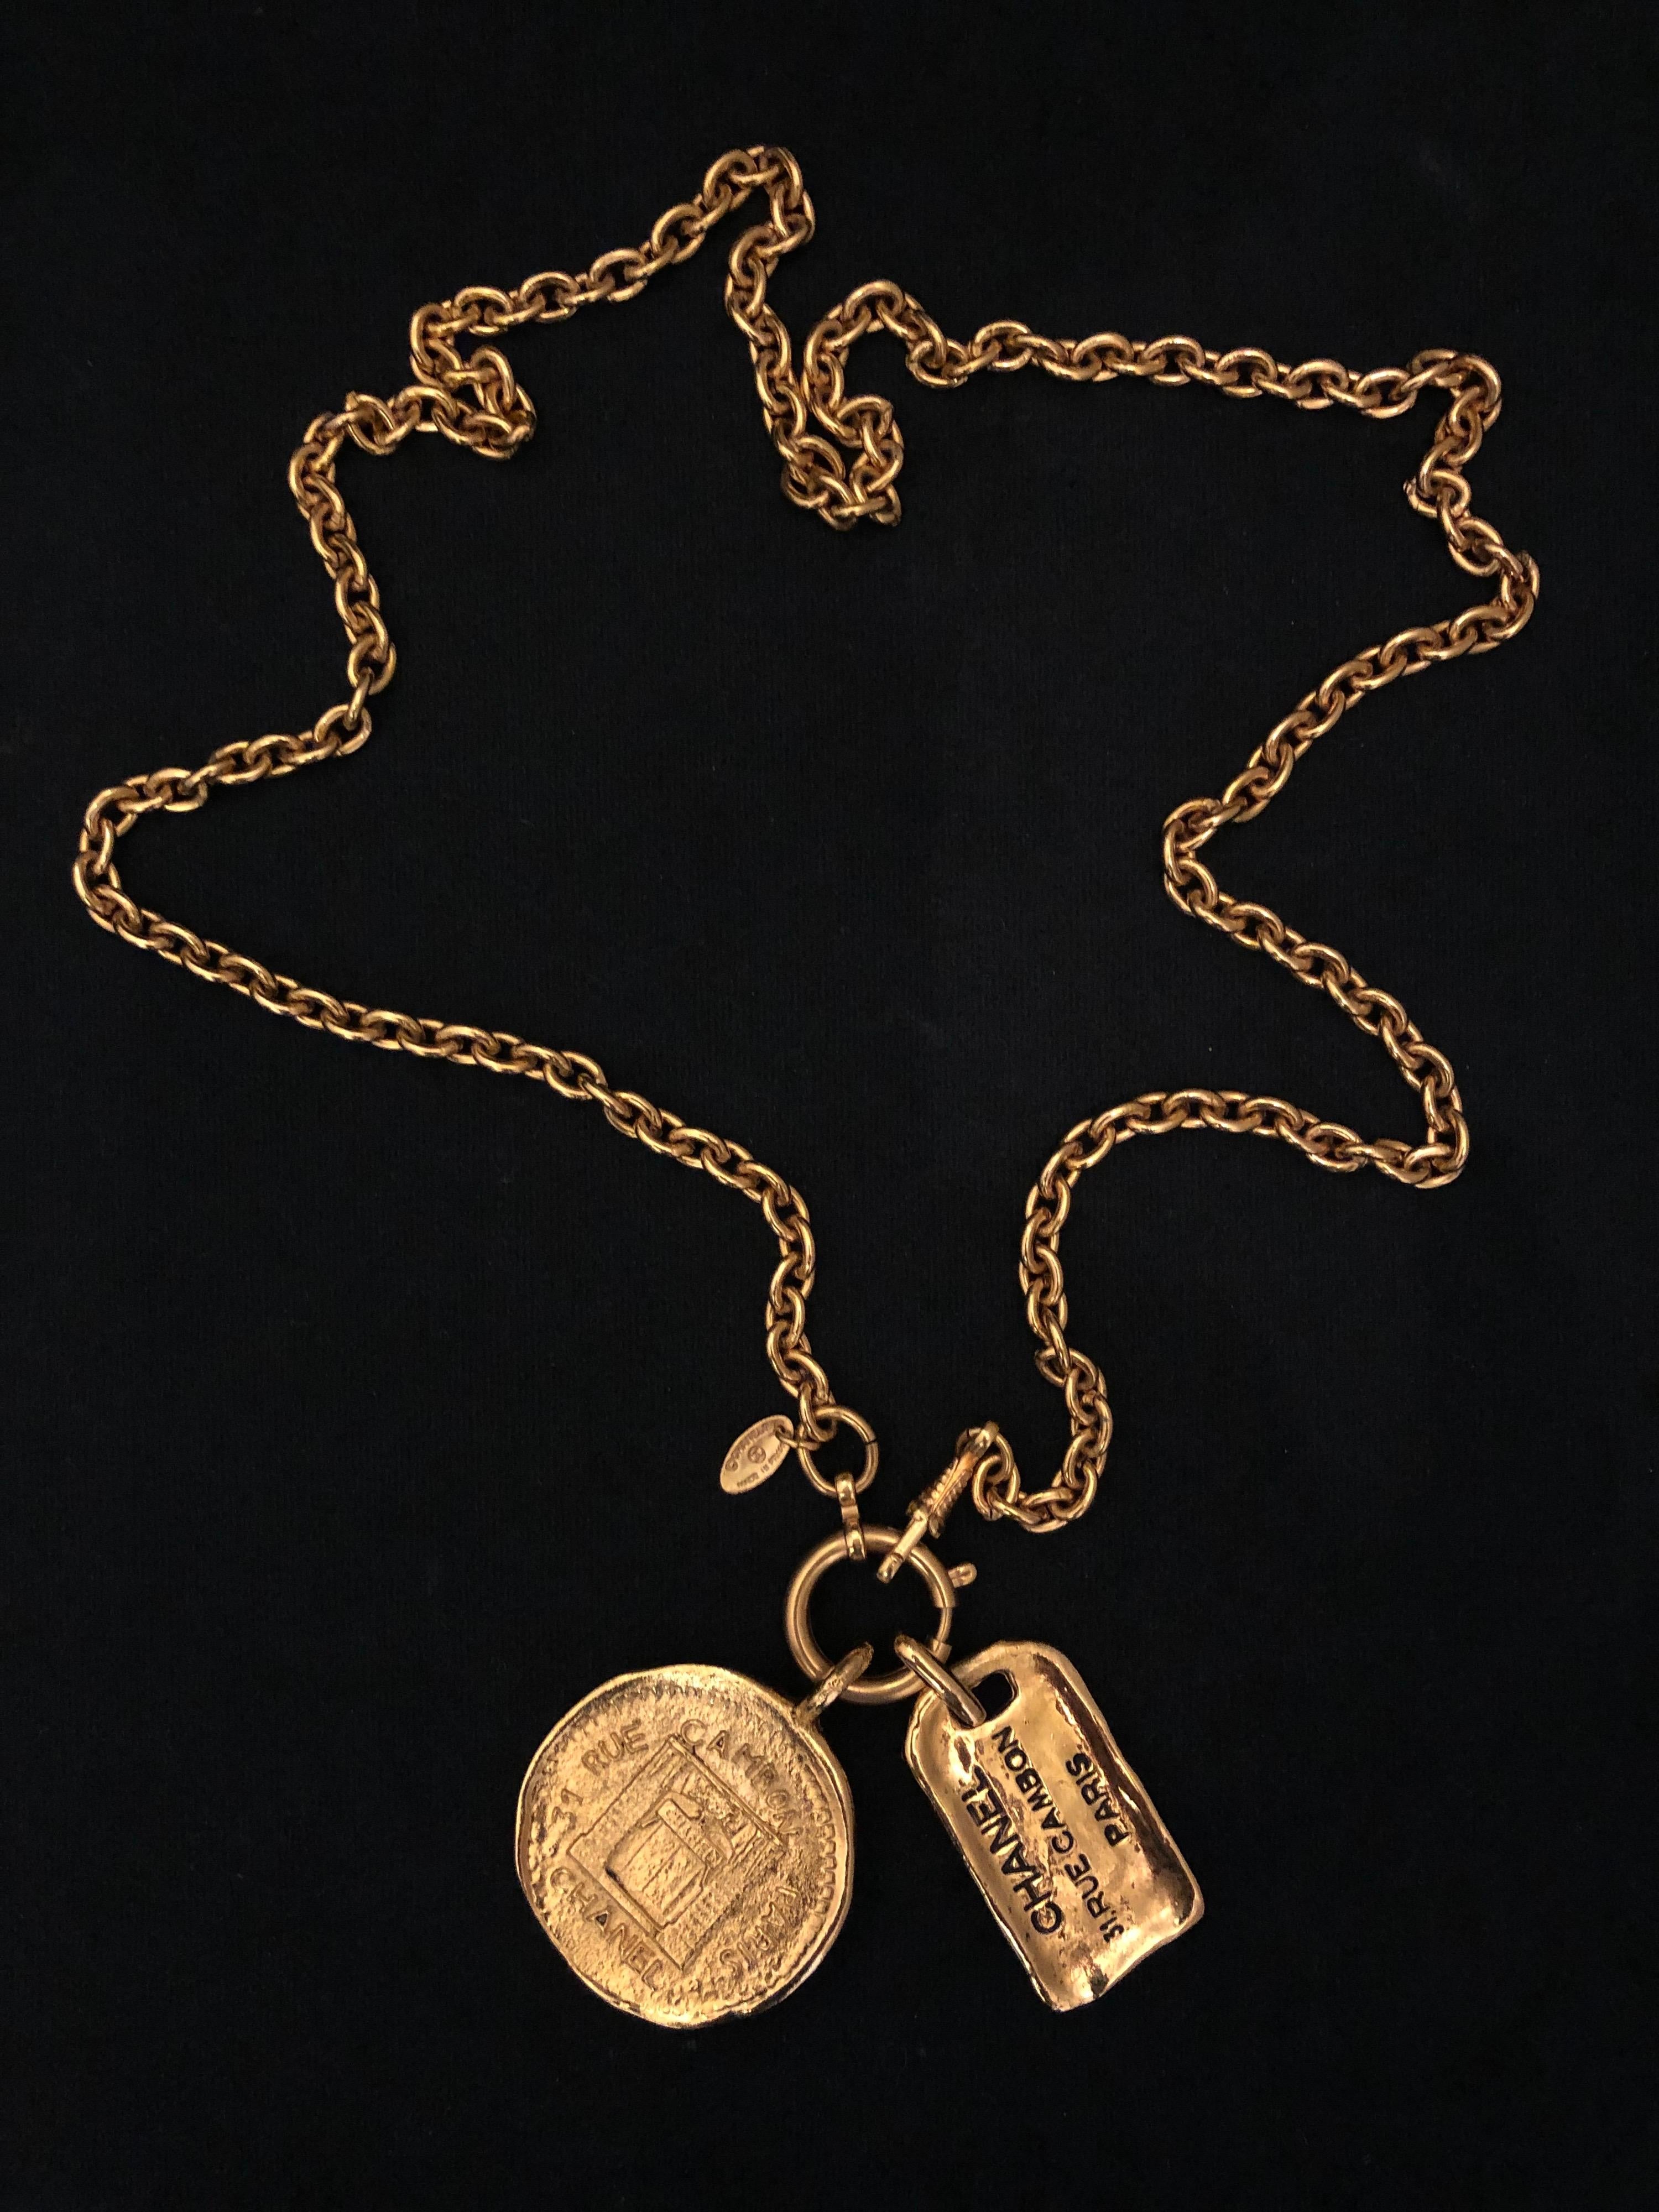 1980s Chanel good toned chain necklace featuring gold toned “31 Rue Cambon” medallion and charm. Spring ring closure. Stamped Chanel made in France. Measures 83 cm medallion 4.1 cm in diameter/4 x 2.4 cm. Comes with box.

Condition - Minor signs of